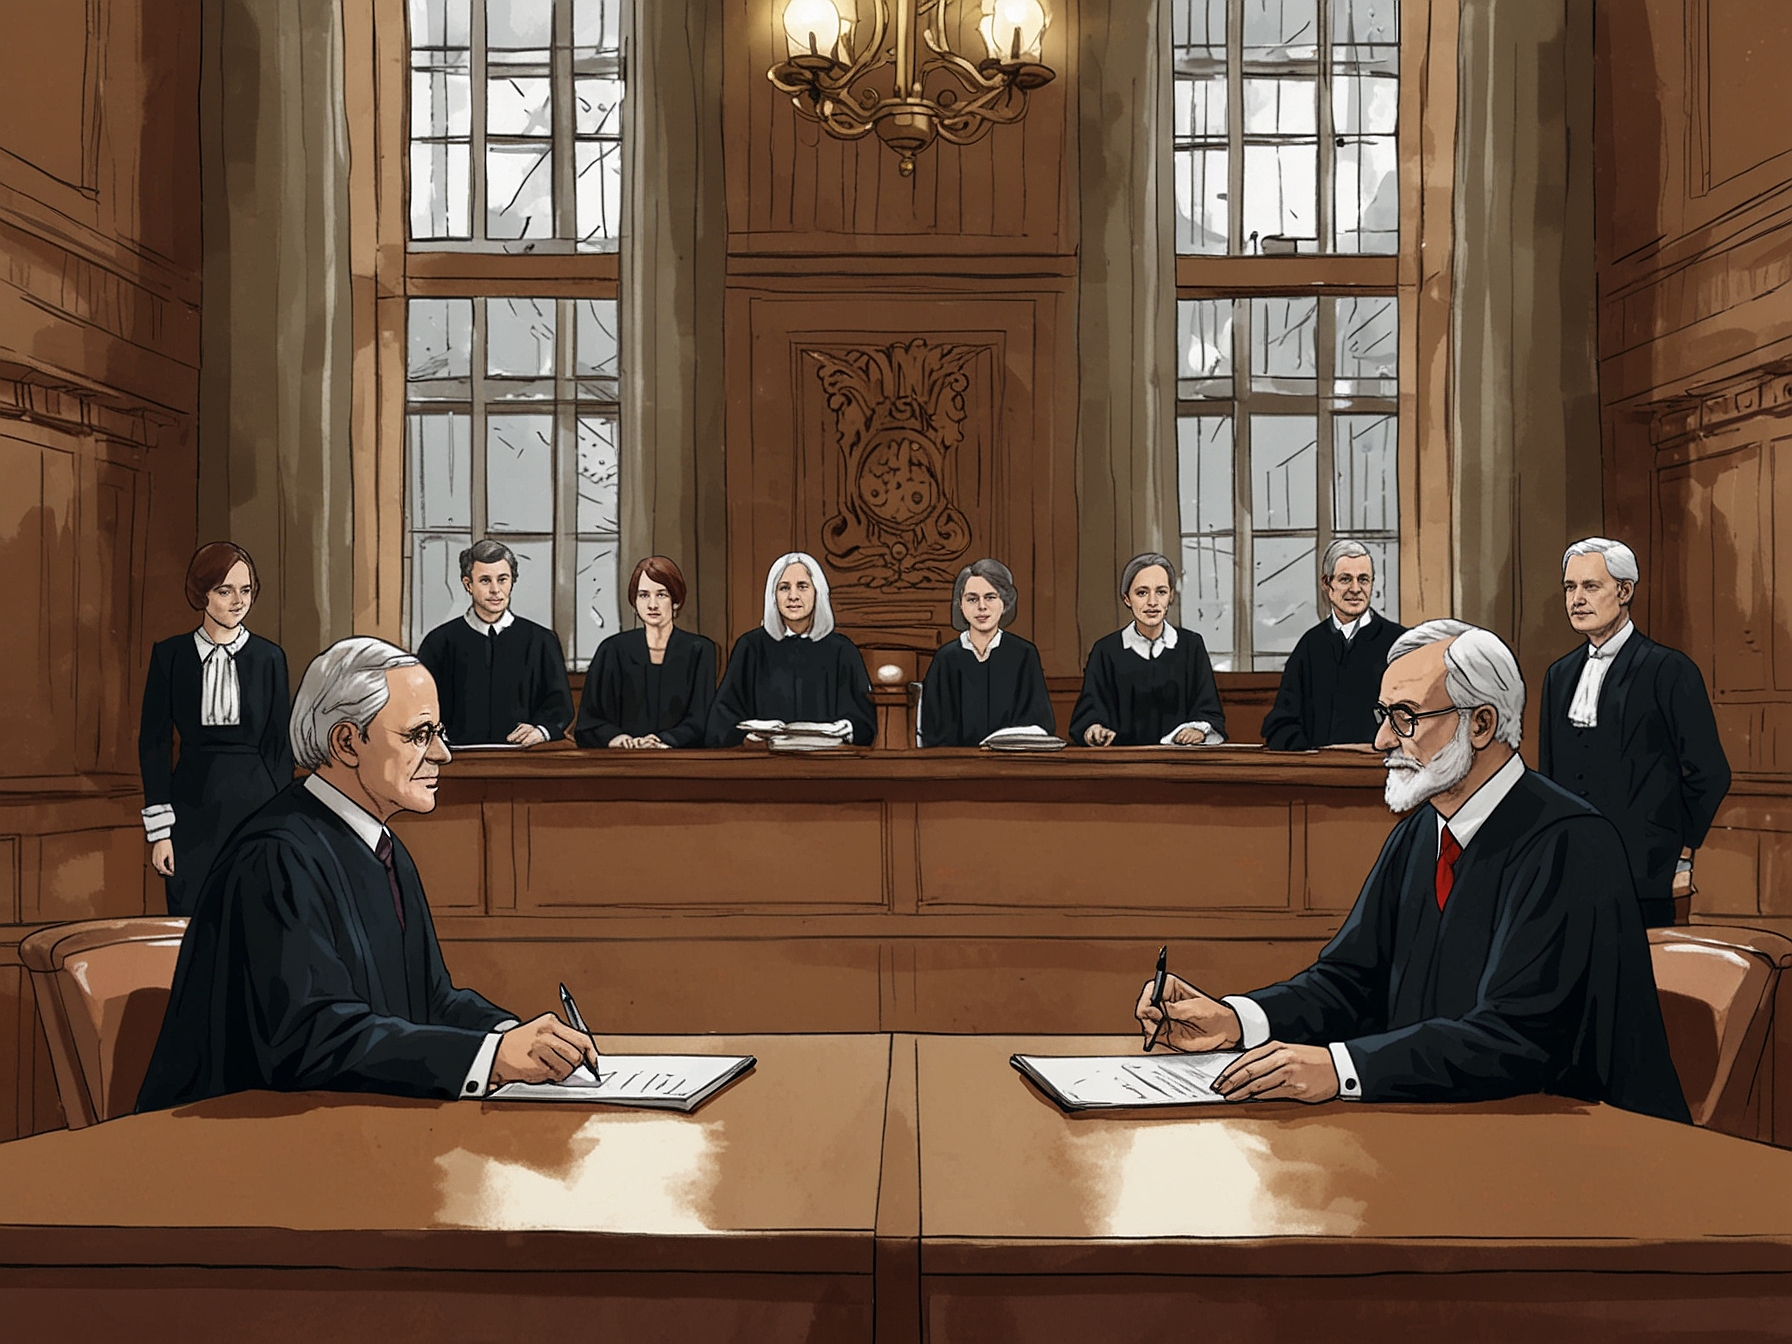 An image depicting a UK court with judges in their formal attire, highlighting the central role of the judiciary in interpreting laws and its growing influence on governance.